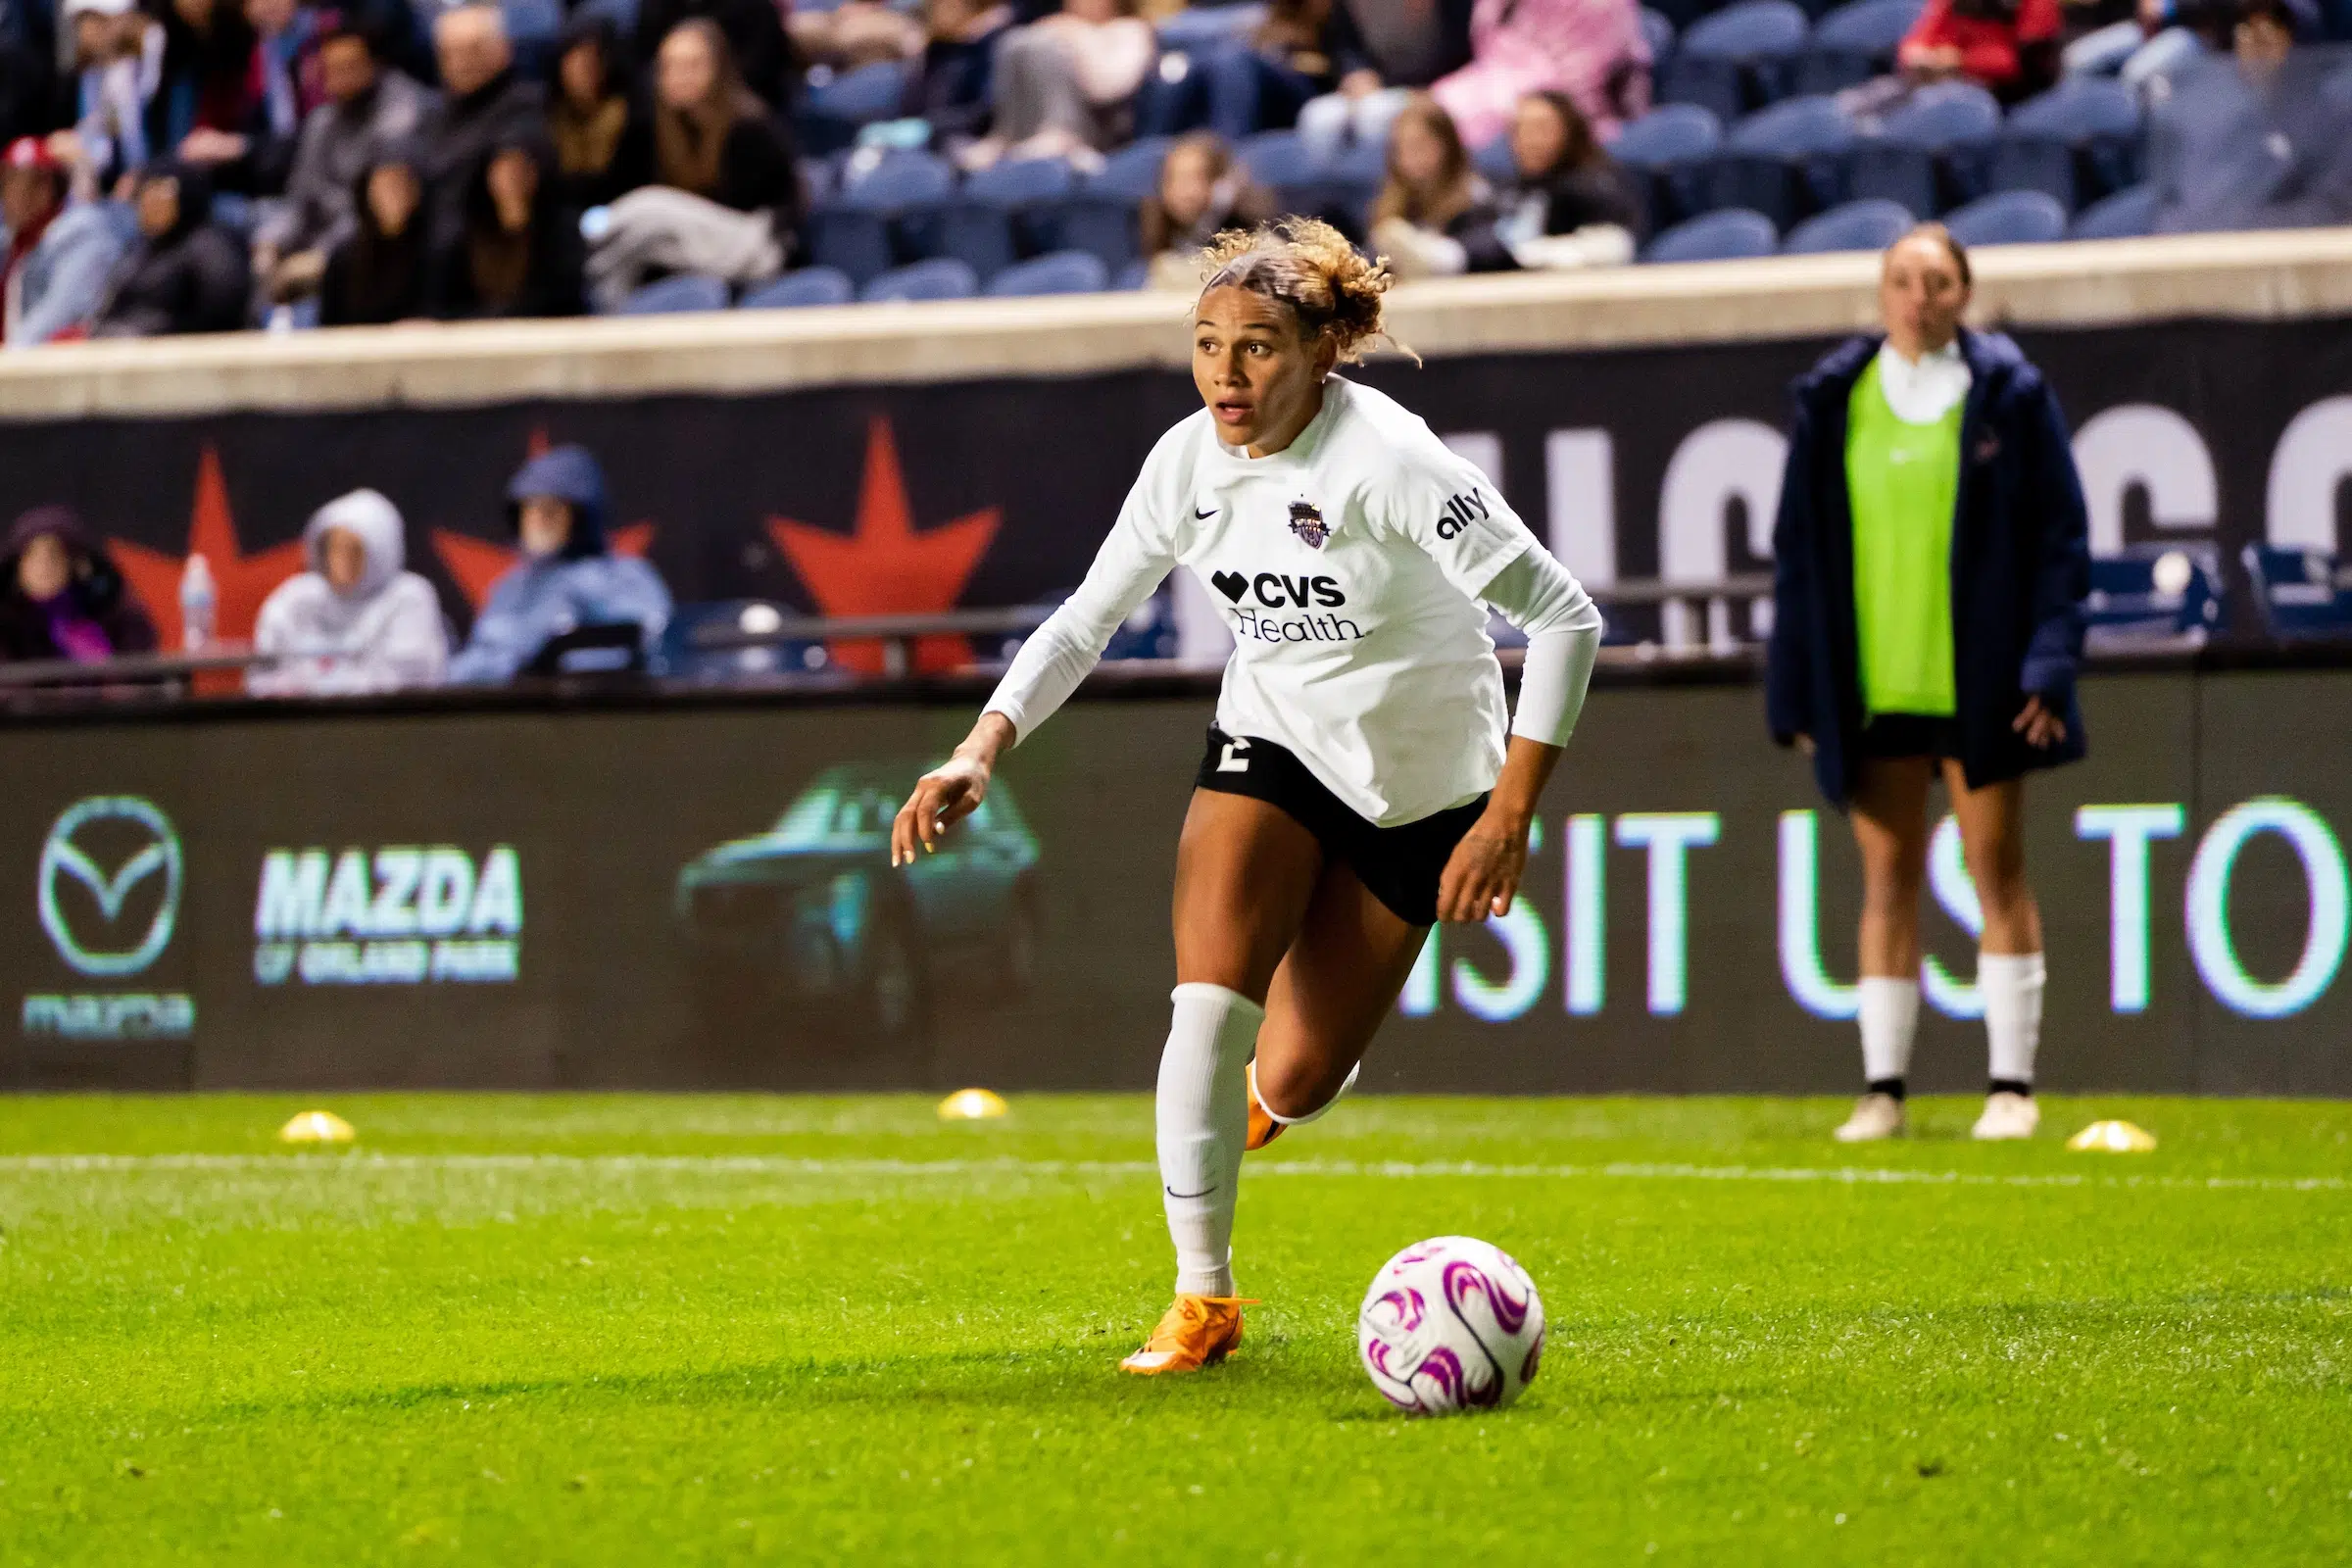 Trinity Rodman looks up to find her teammates as she dribbles a soccer ball. She wears a long sleeve white top, black shorts, and white socks.